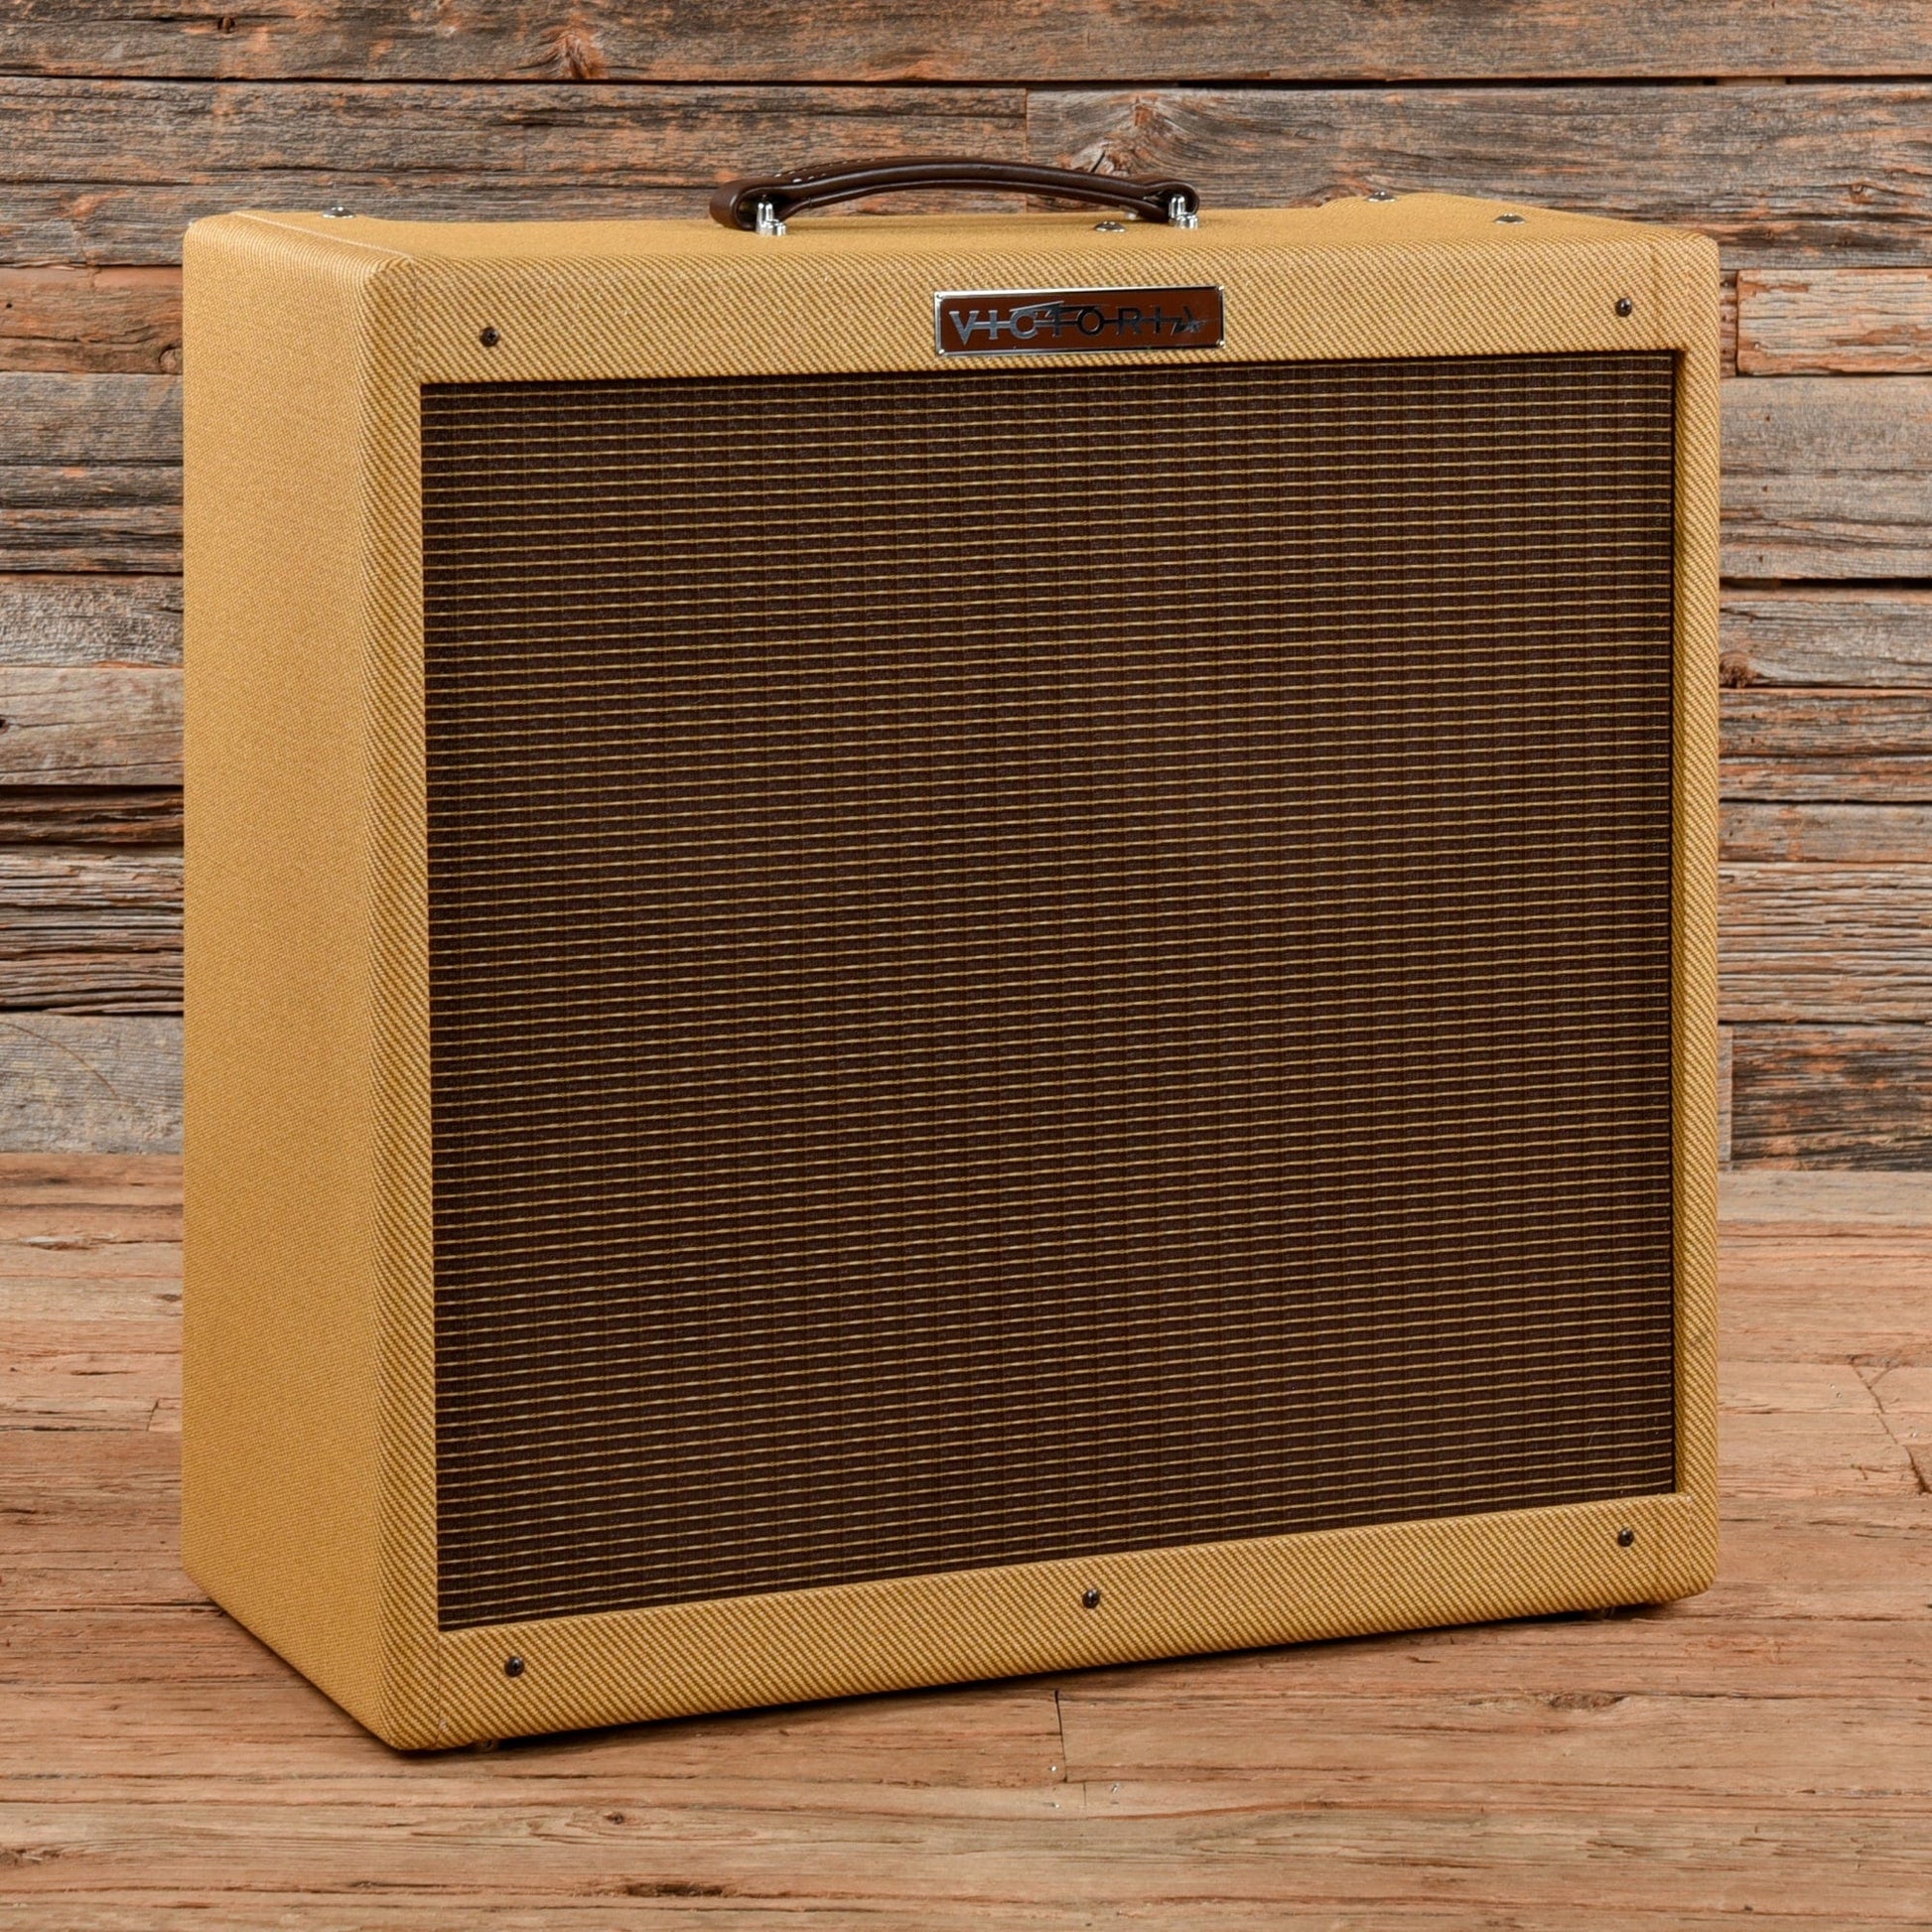 Victoria 45410 Combo Amps / Guitar Cabinets